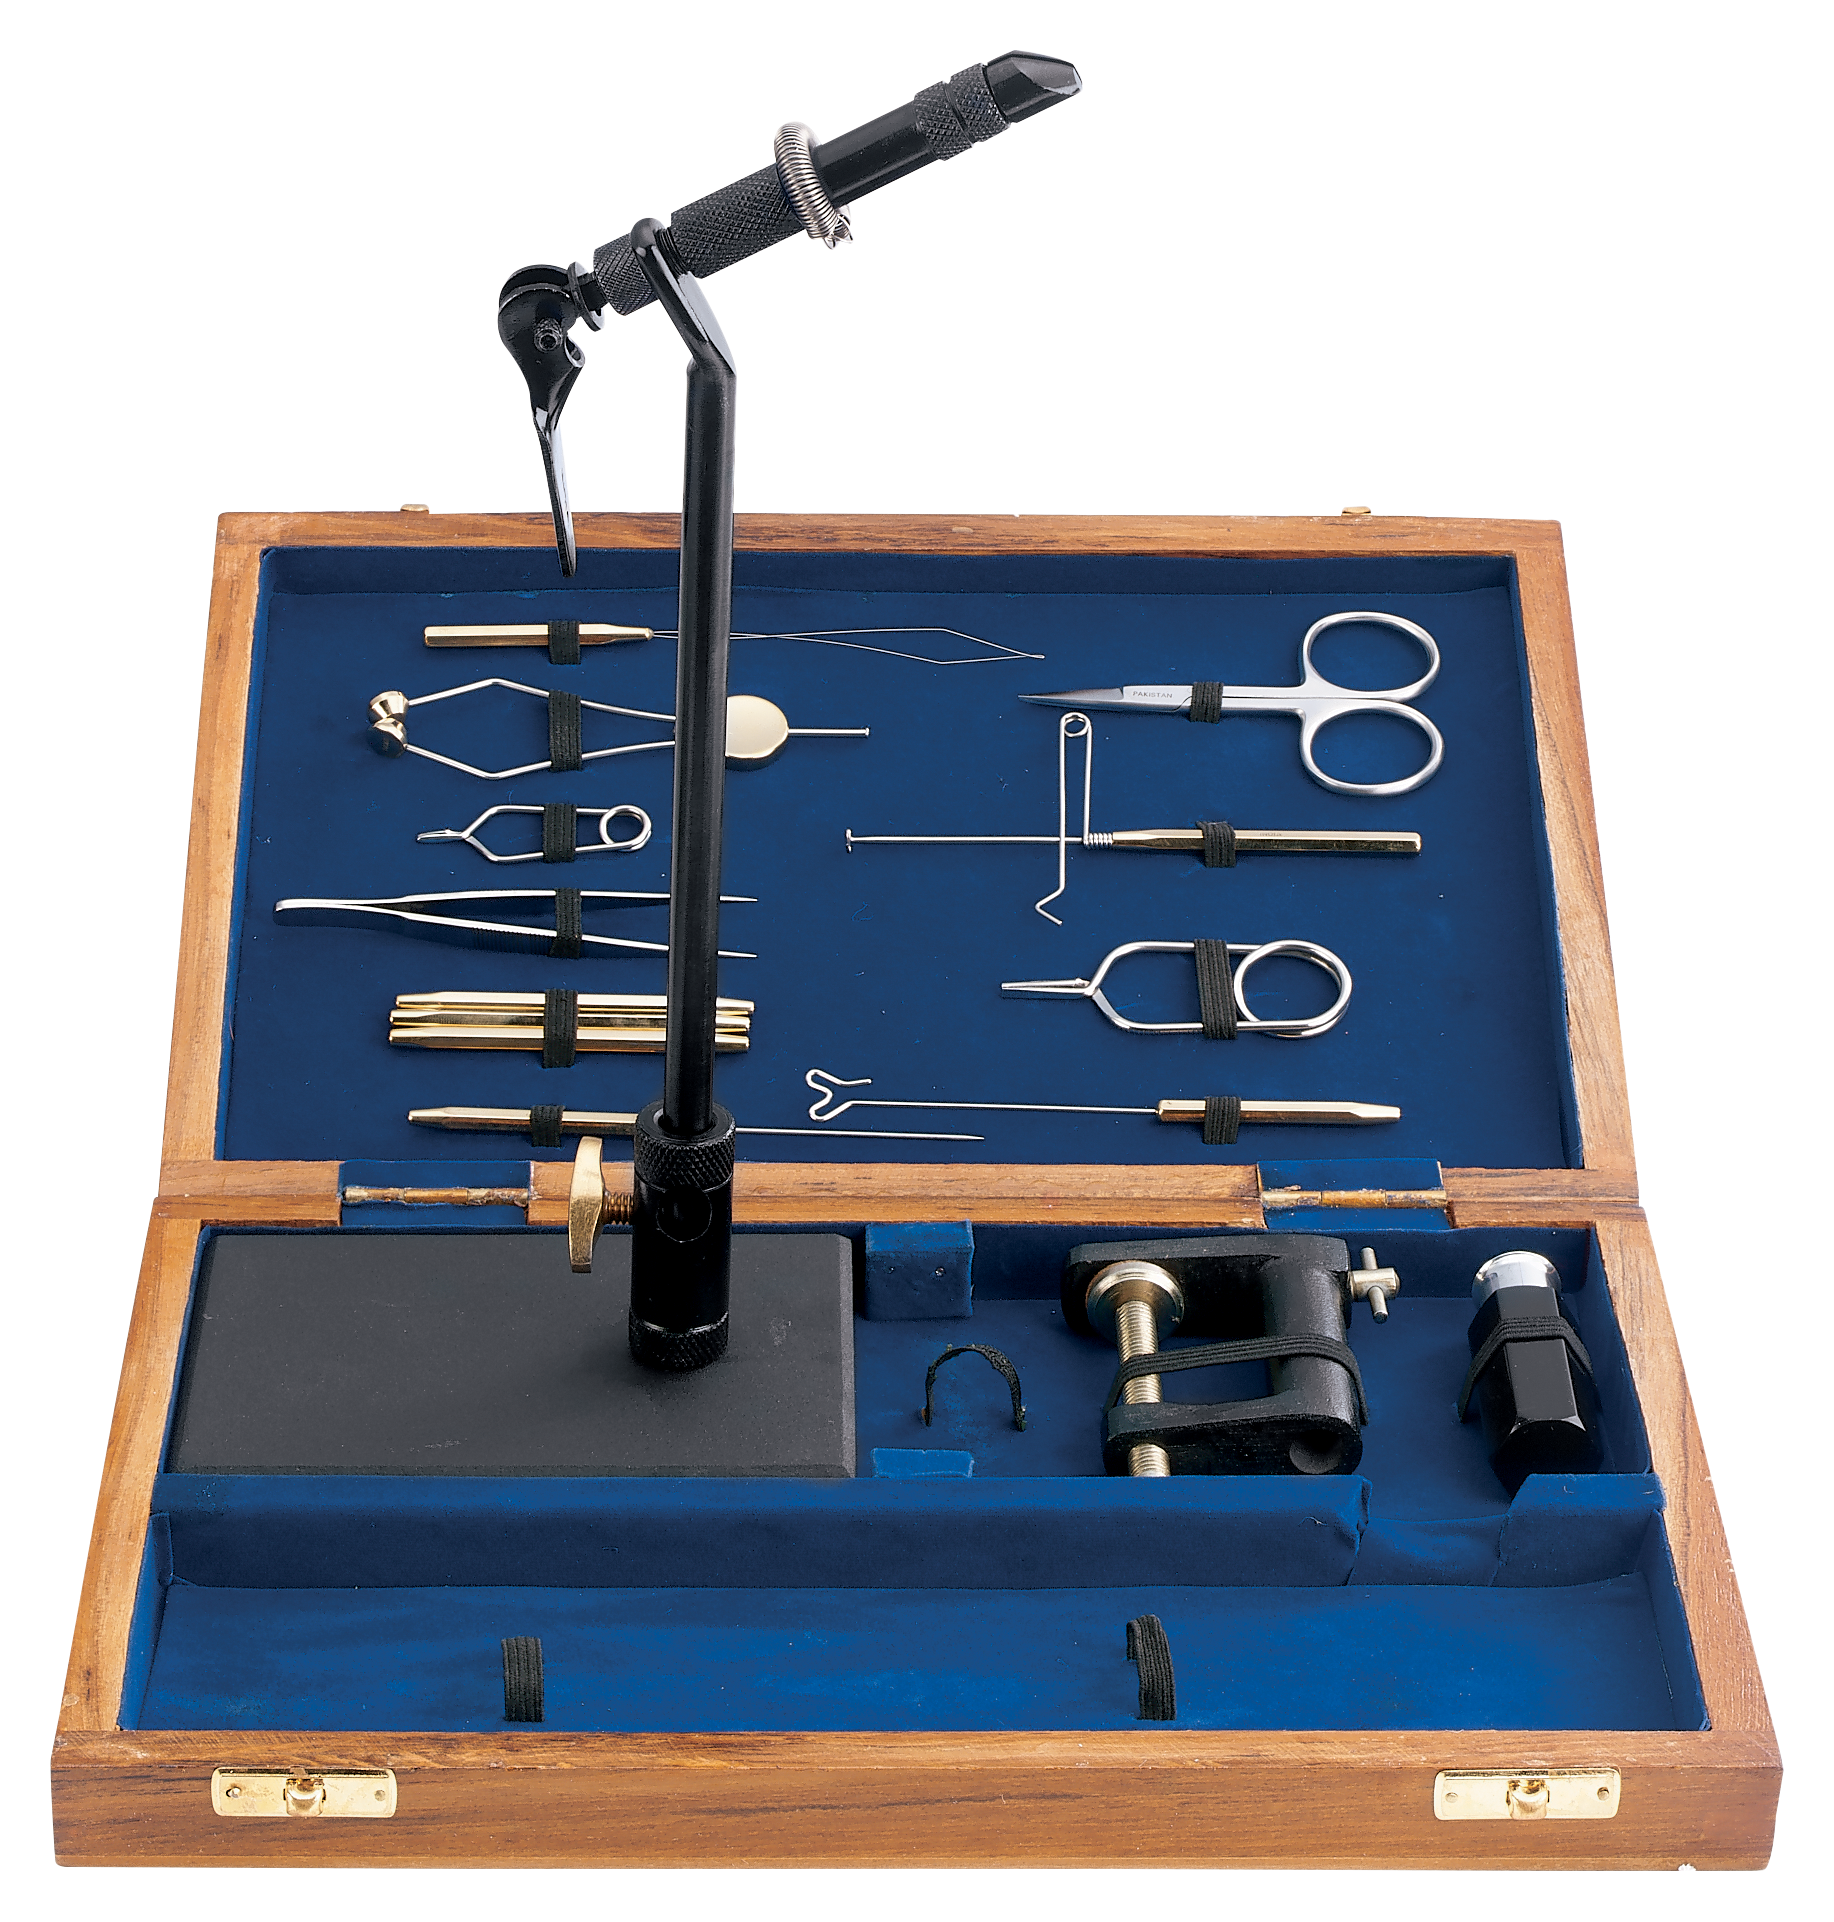 Cabela's Deluxe Fly Tying Kit with Case